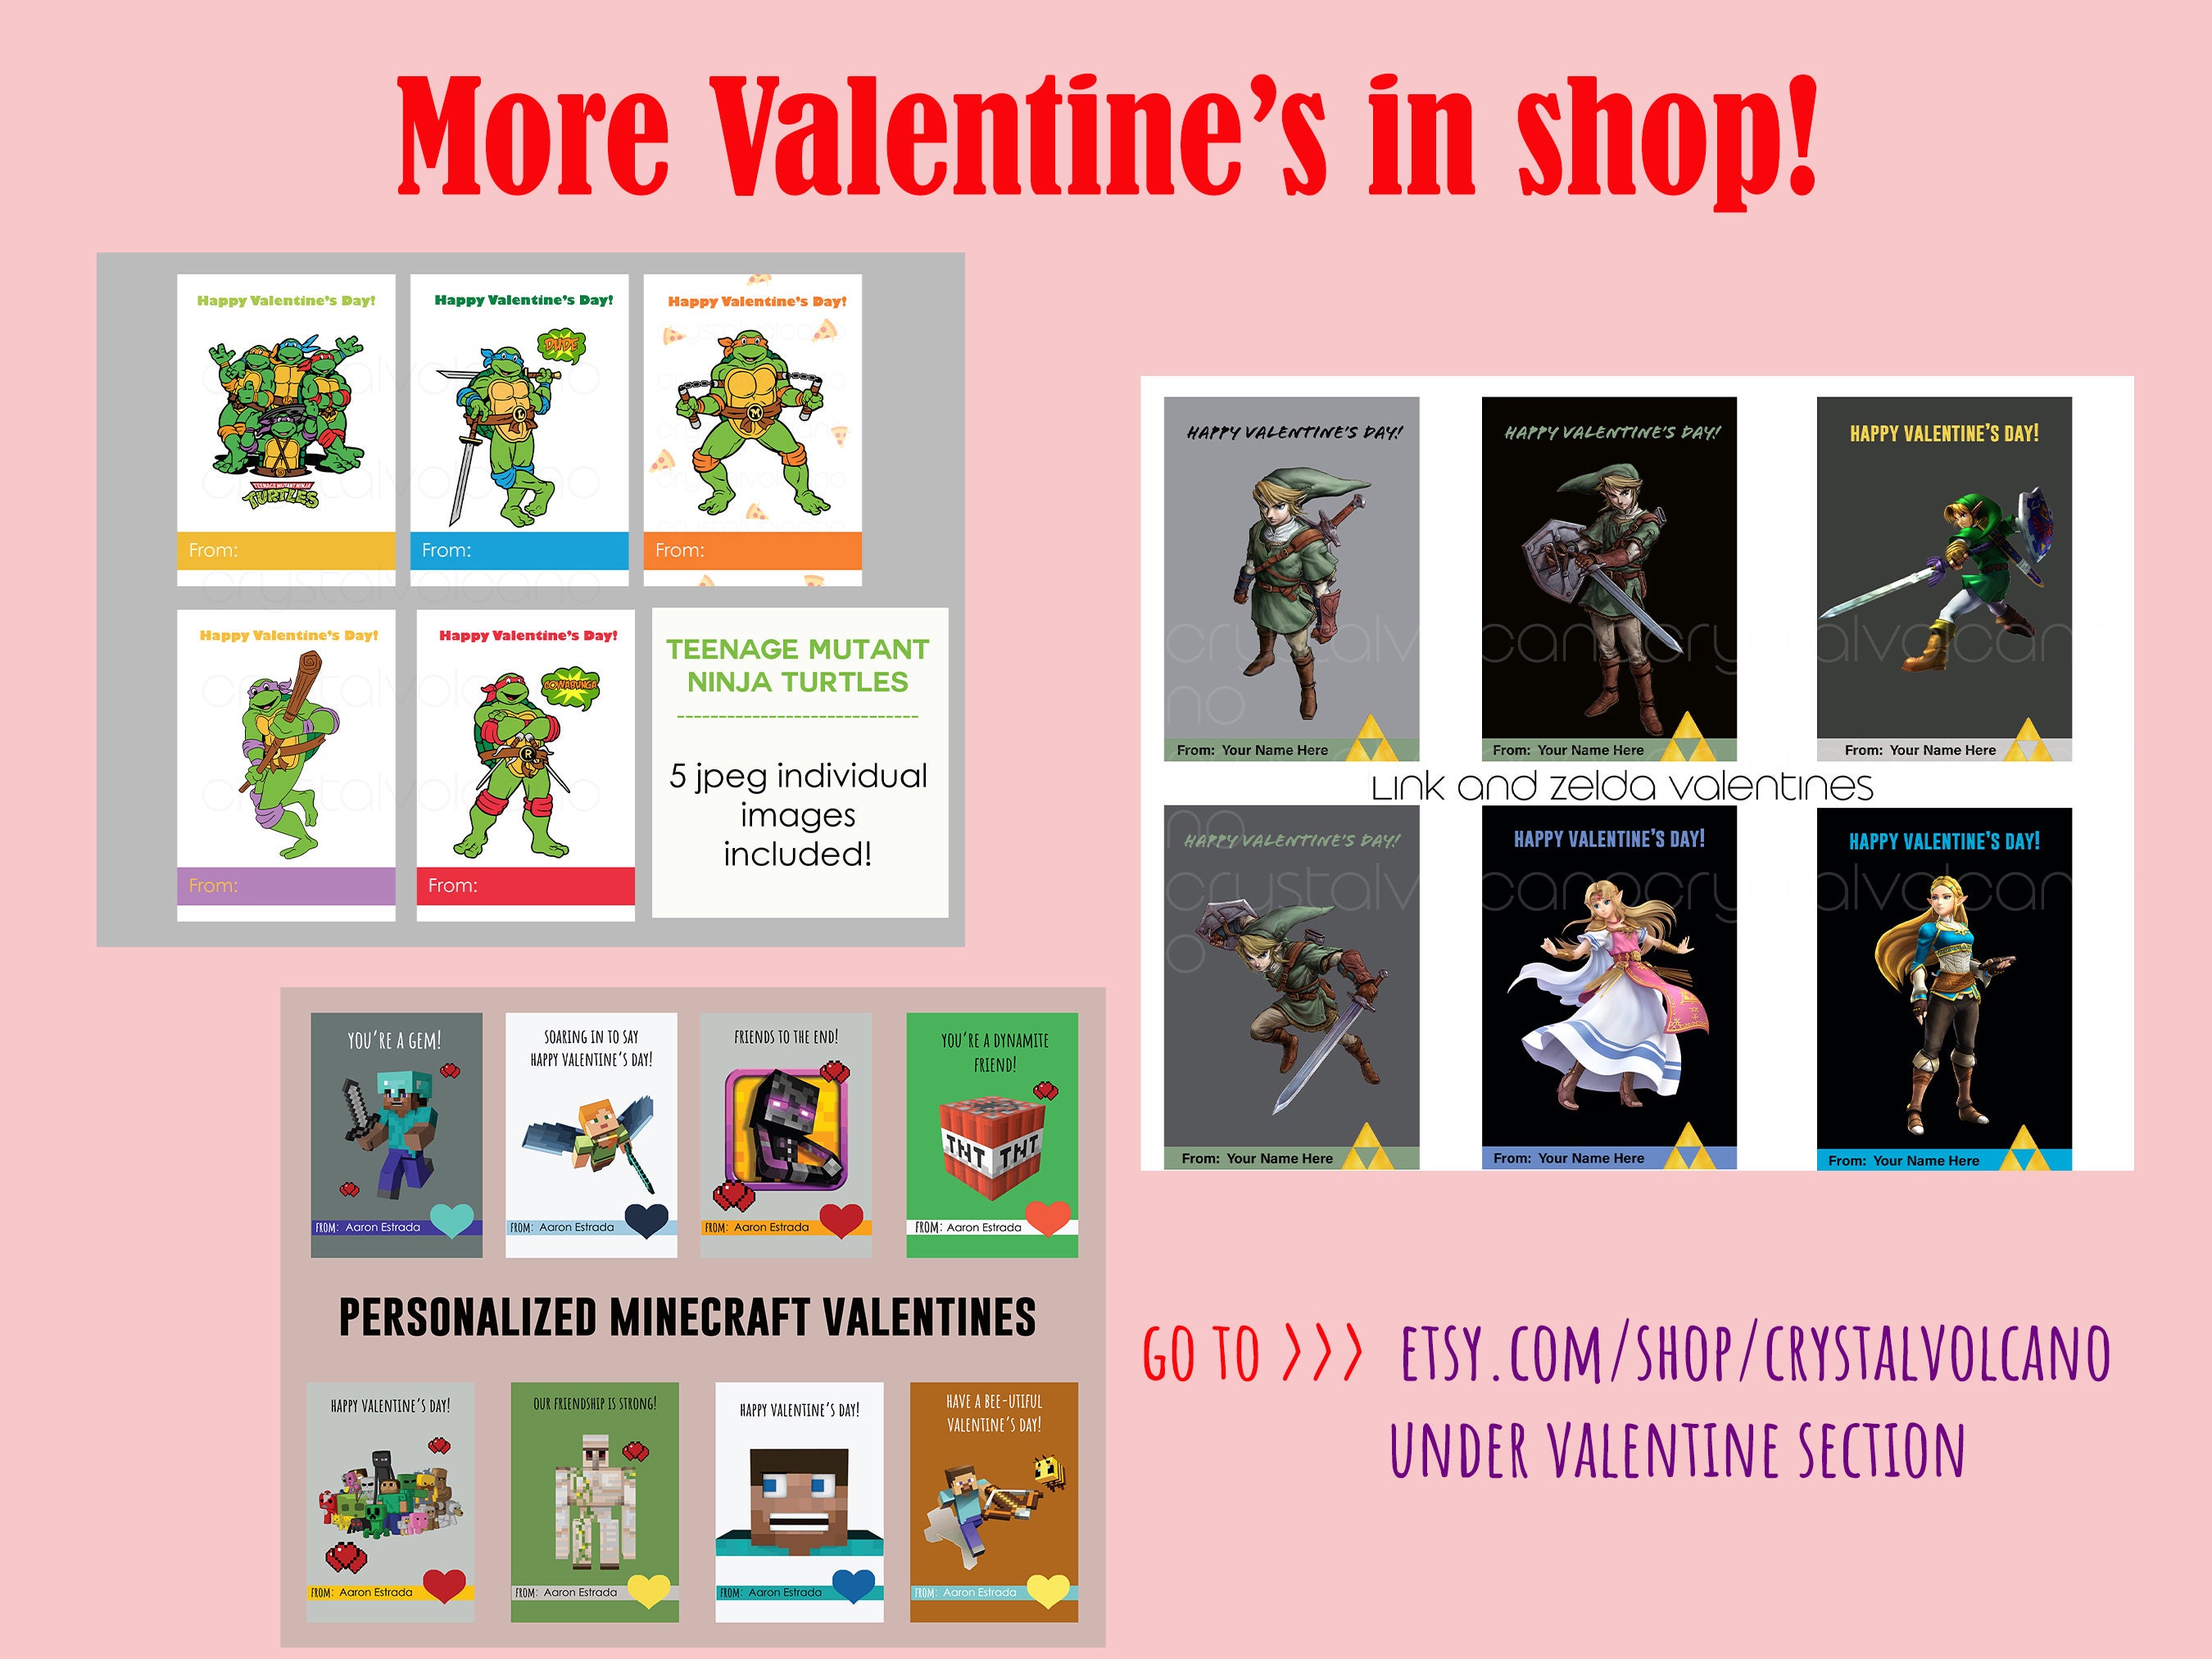 Five Nights at Freddy's Valentine's Day Cards * FNAF School Valentines *  Five Nights Freddys Printable Valentines Cards - FNAF Party Favors